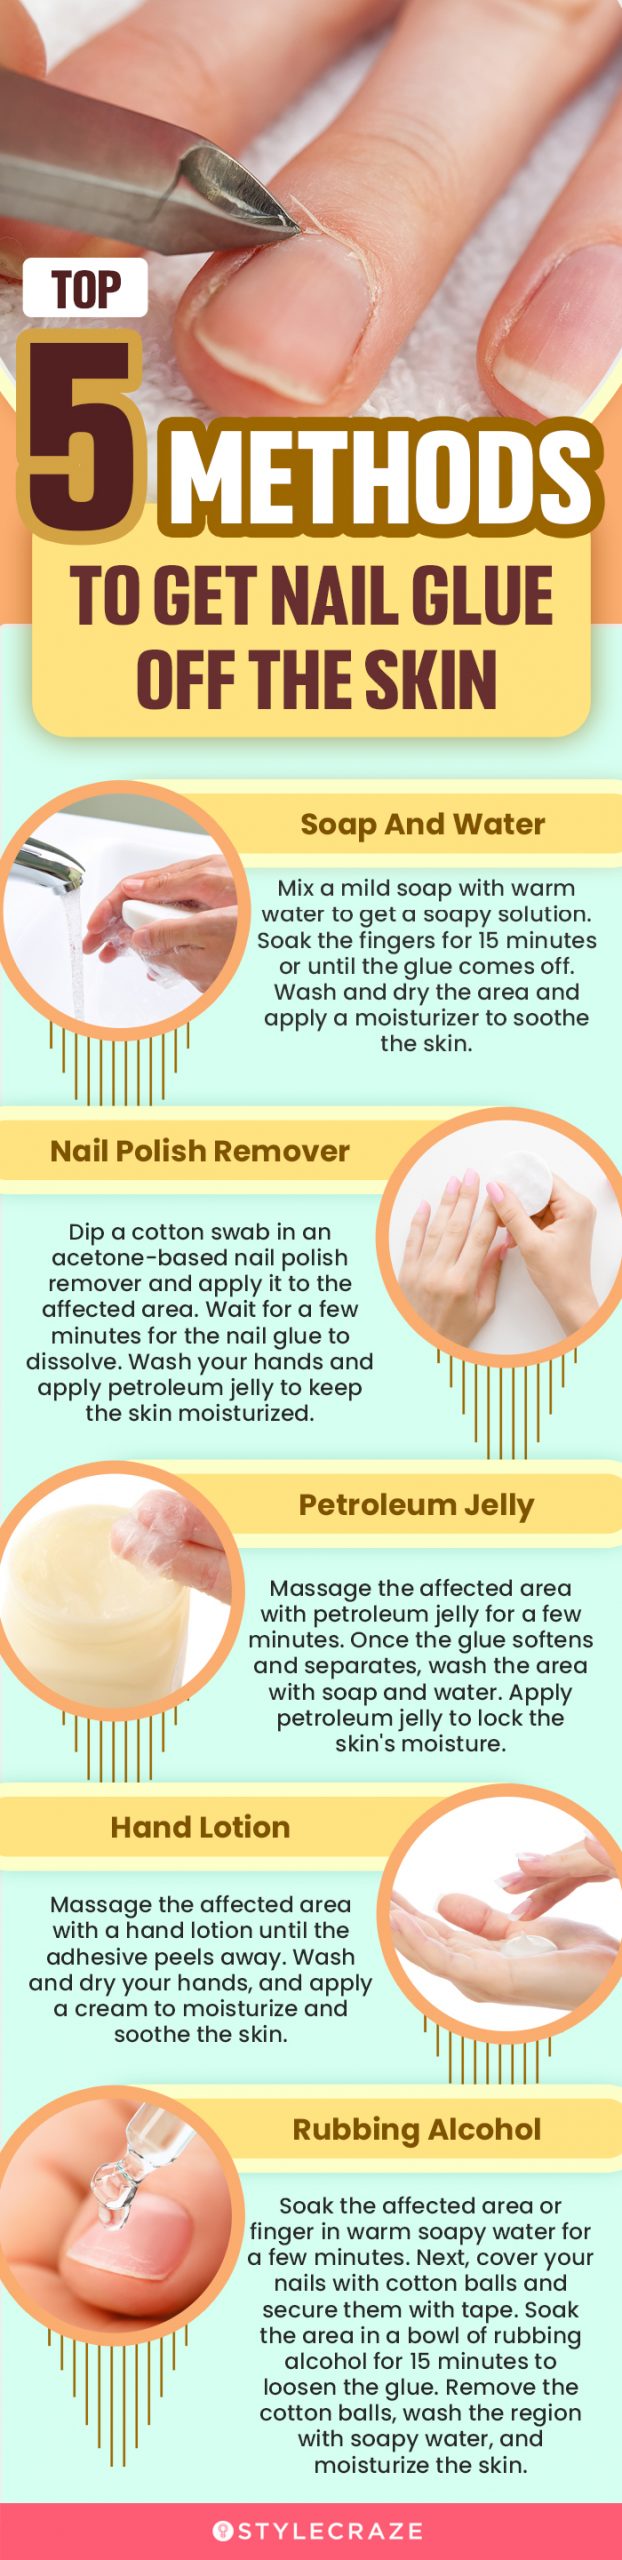 top 5 methods to get nail glue off the skin (infographic)